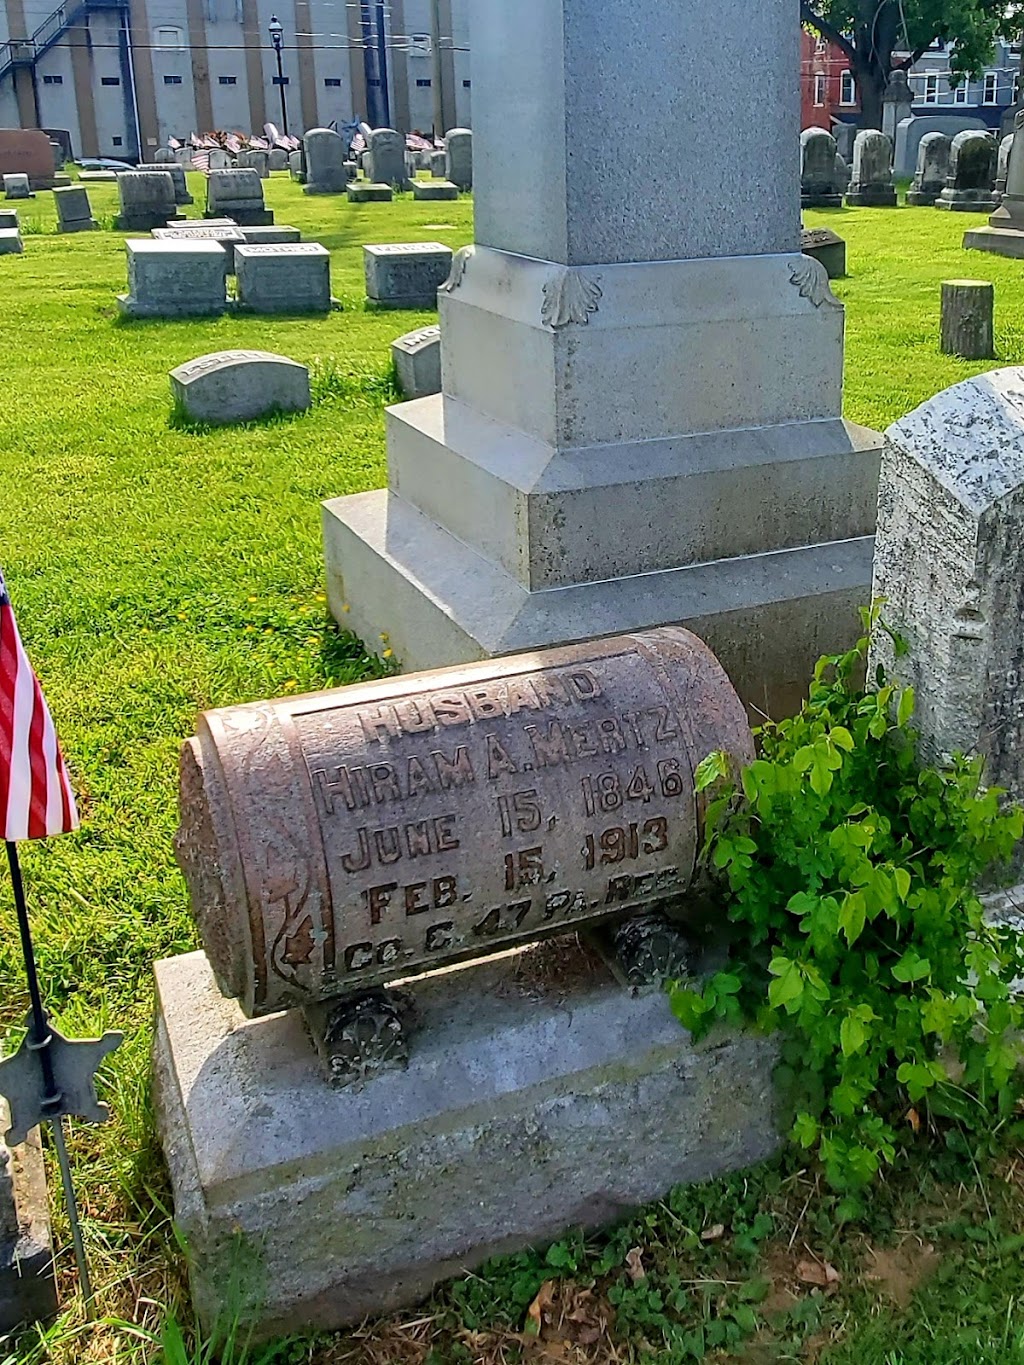 Union & West End Cemetery | 326-348 N 10th St, Allentown, PA 18102 | Phone: (610) 434-9885